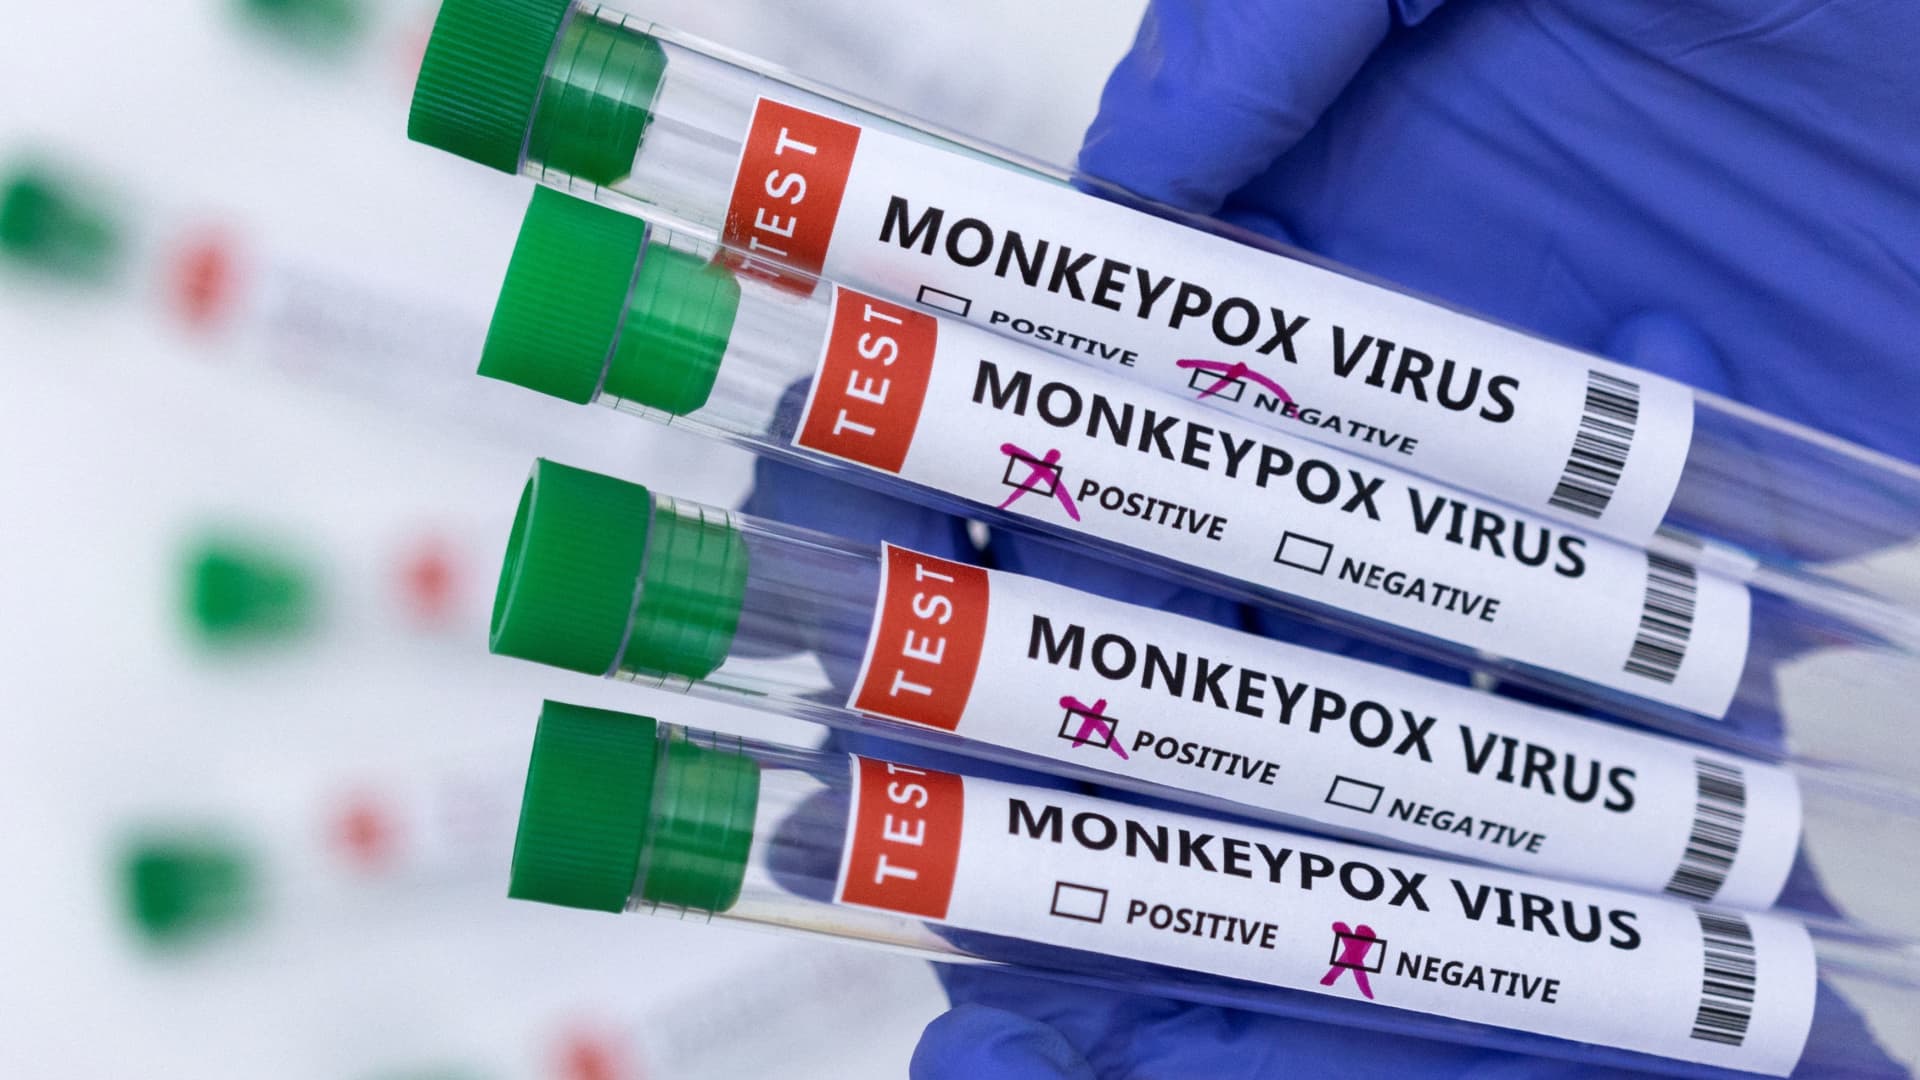 US confirmed monkeypox cases rise to 3,600